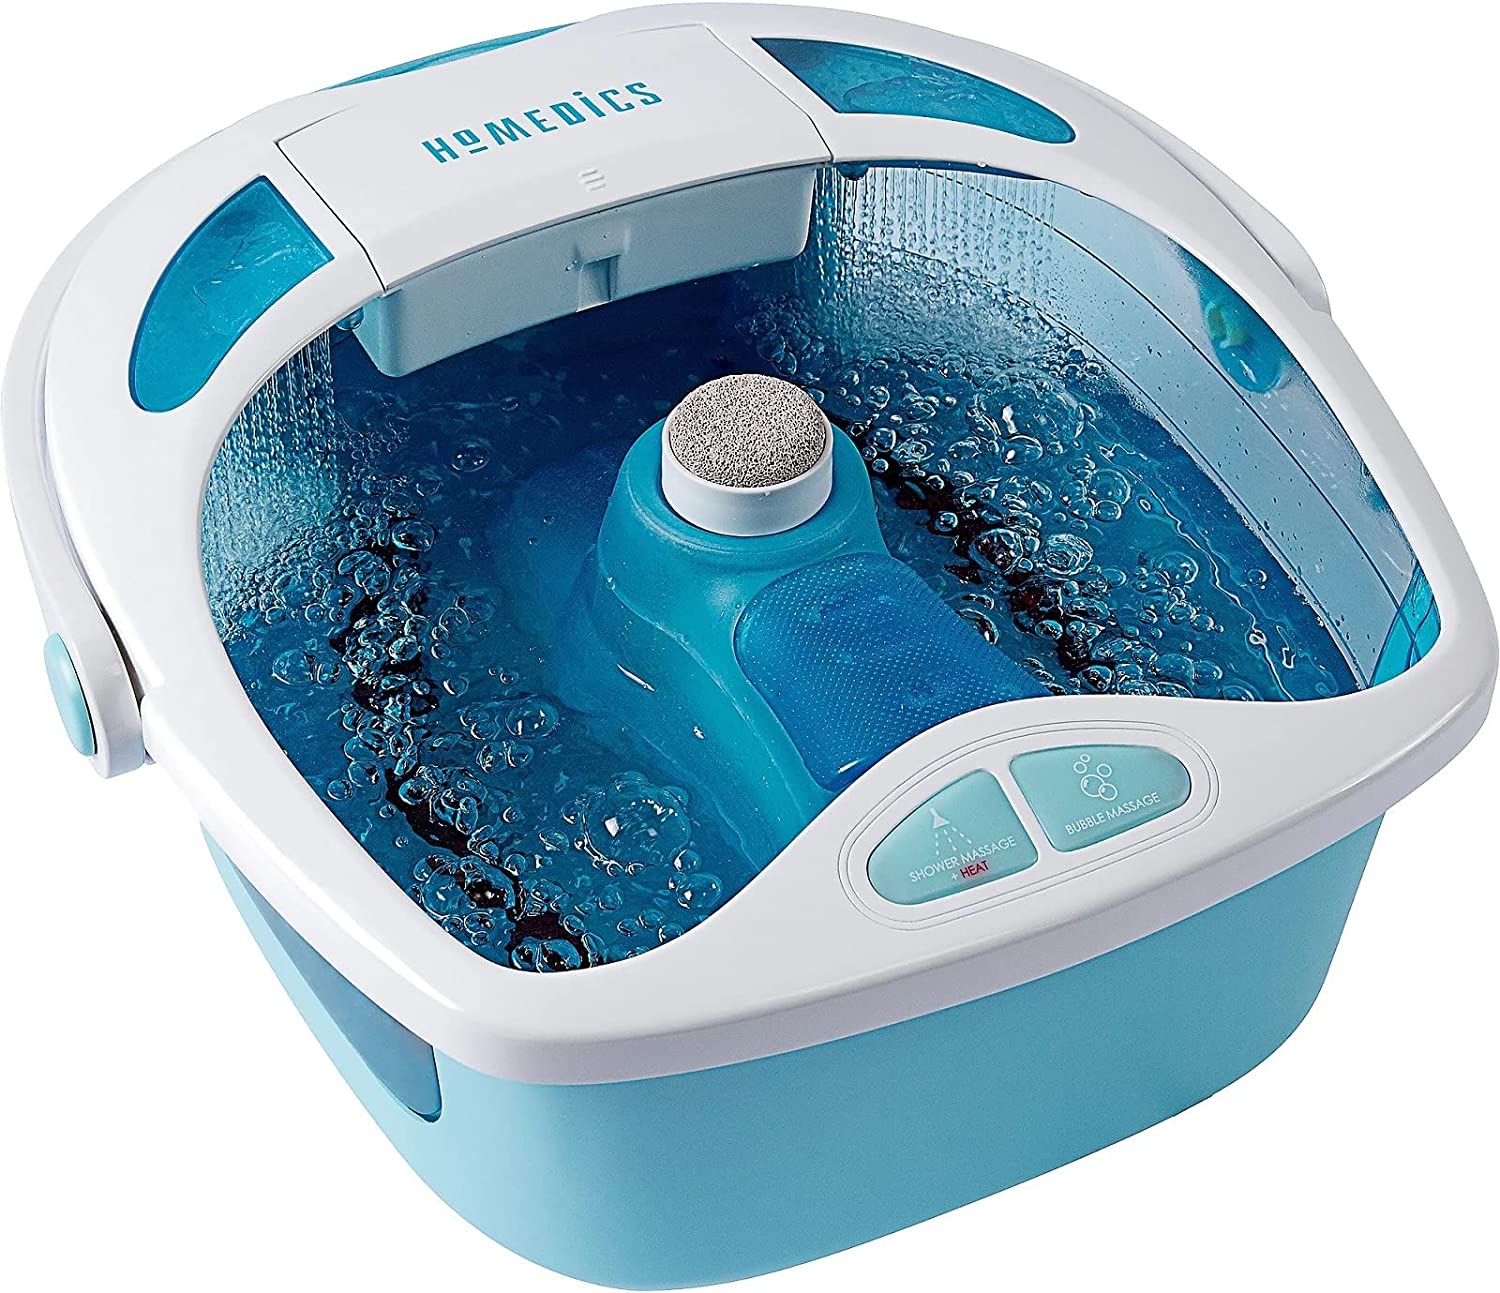 Shower Bliss Foot Spa